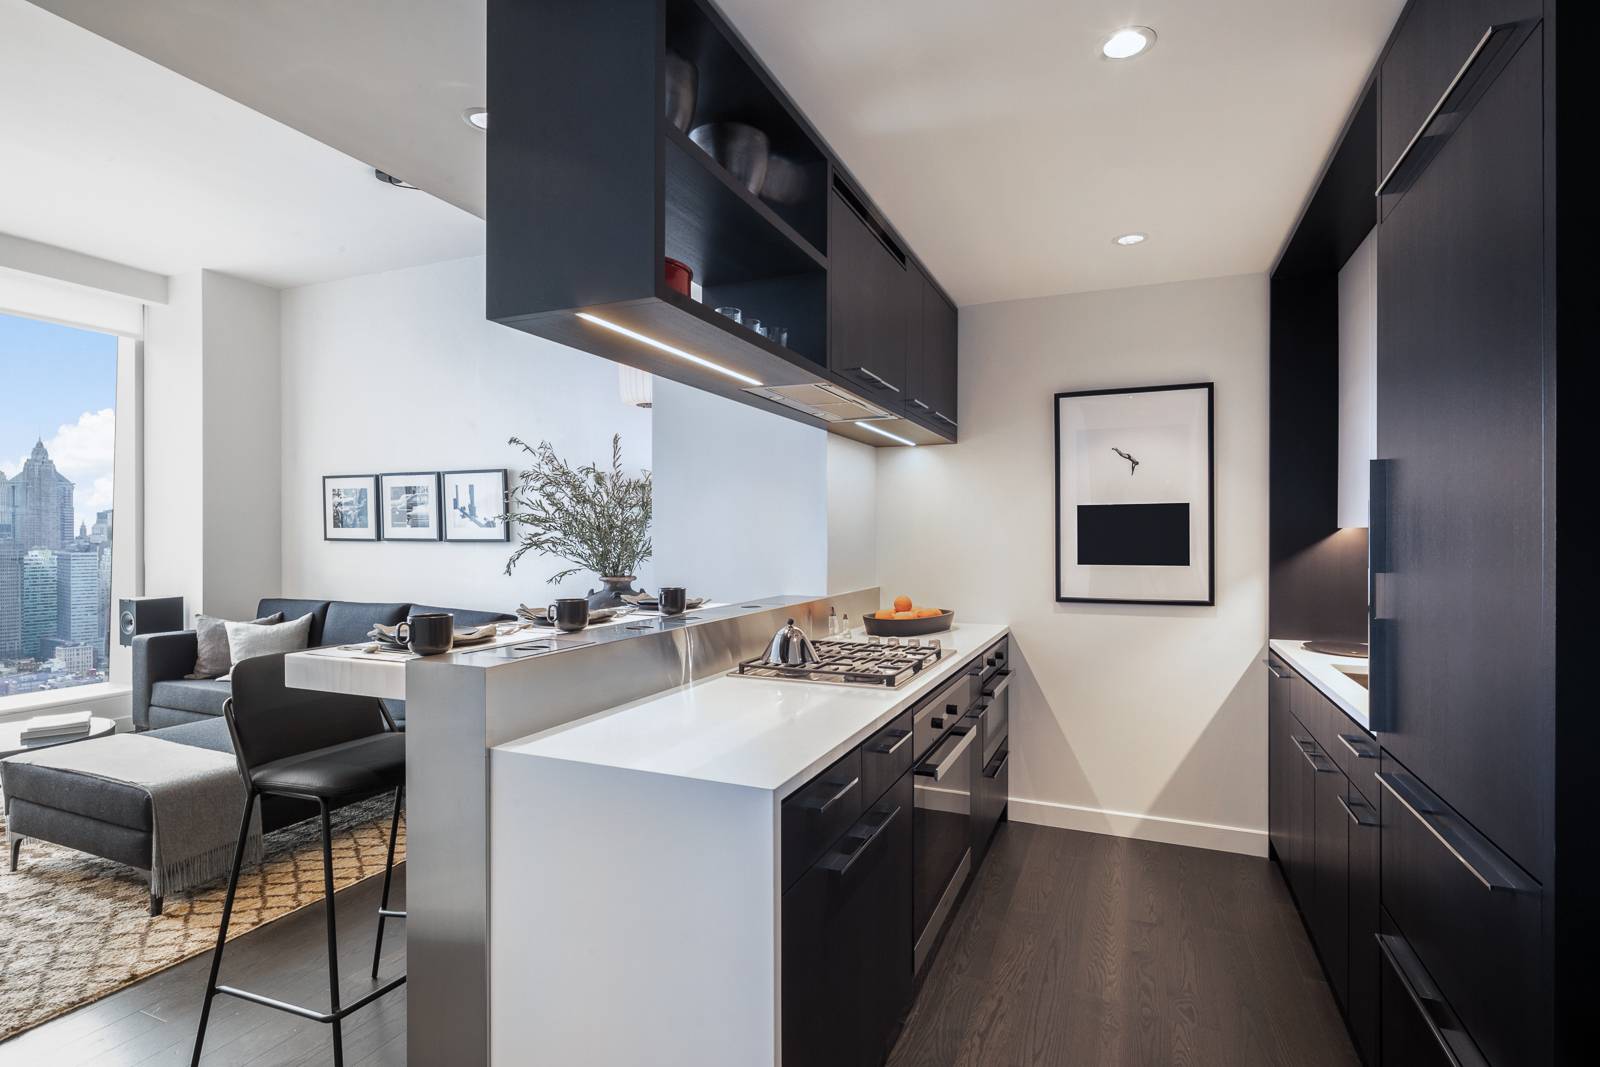 ONE MANHATTAN SQUARE OFFERS ONE OF THE LAST 20 YEAR TAX ABATEMENTS AVAILABLE IN NEW YORK CITY Residence 11P is a 723 square foot one bedroom, one bathroom with an ...